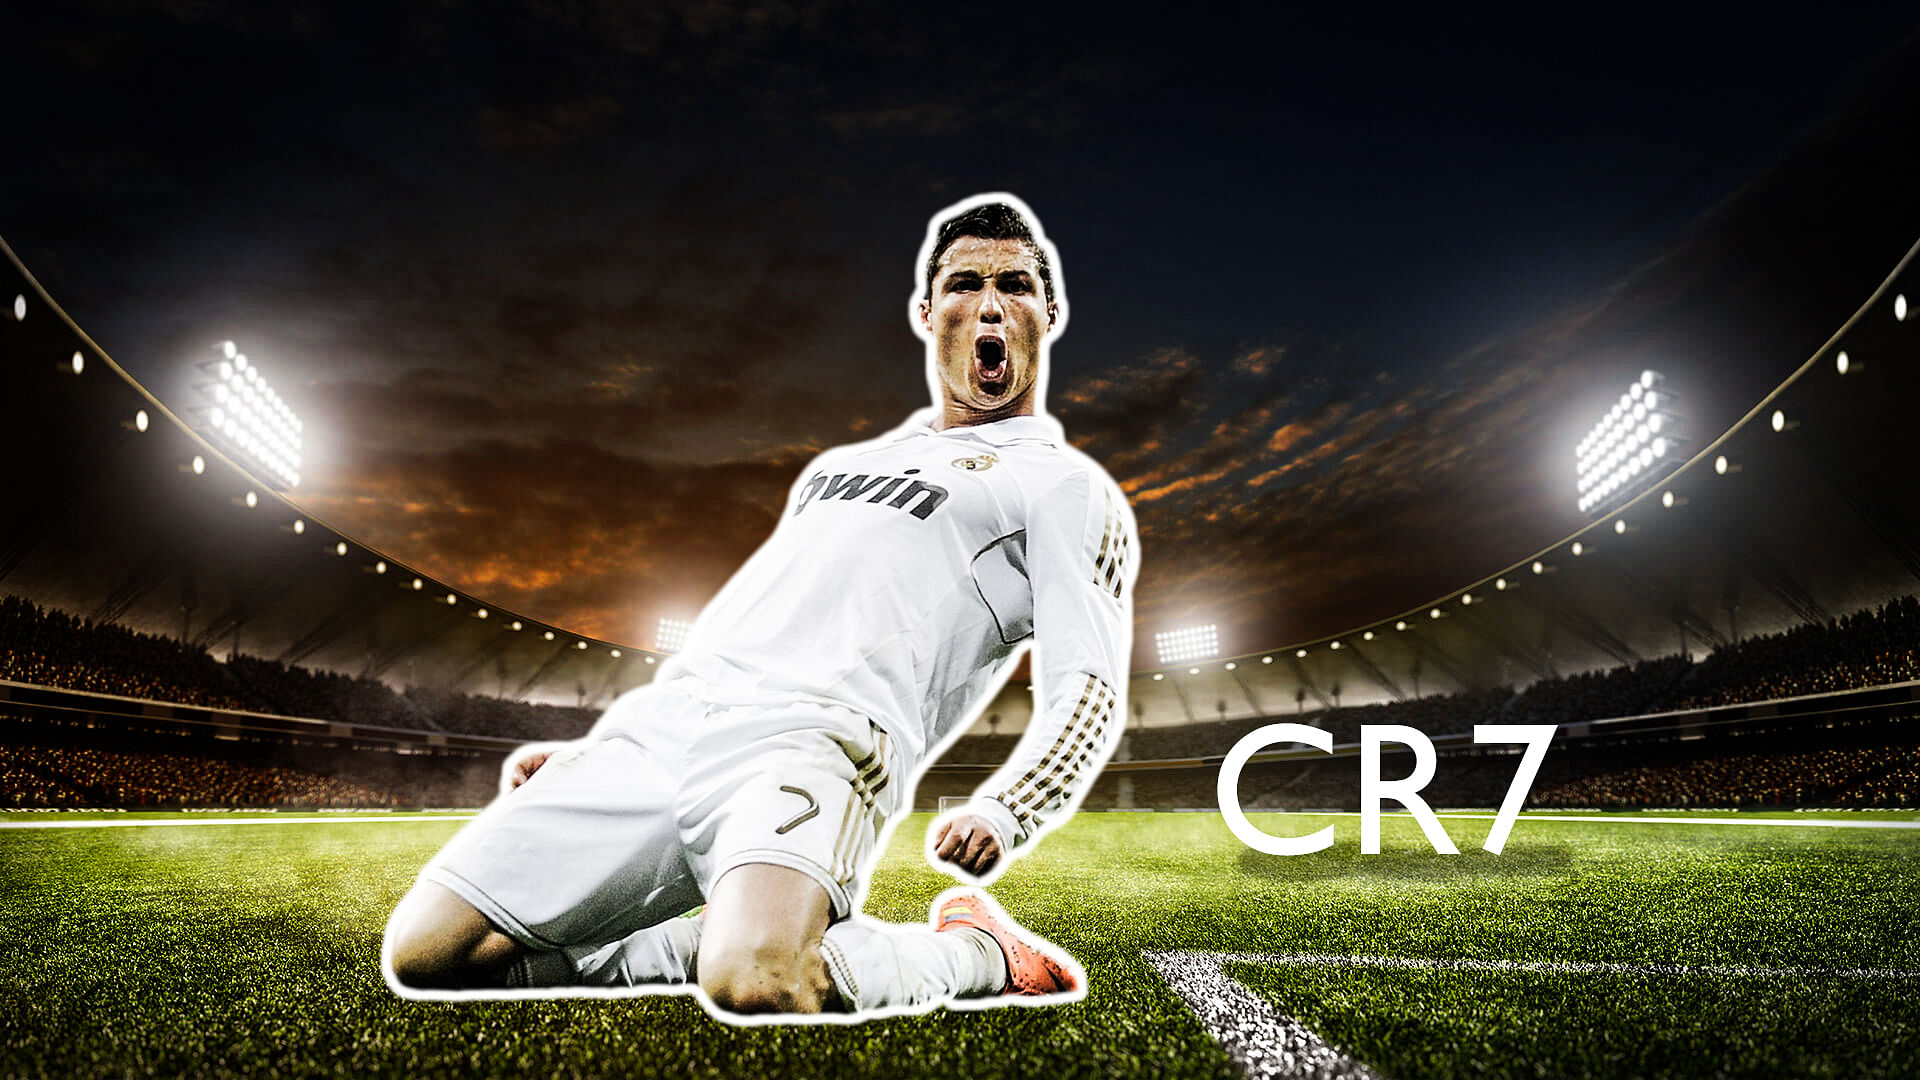 CR7 Wallpaper iPhone - KoLPaPer - Awesome Free HD Wallpapers-thanhphatduhoc.com.vn